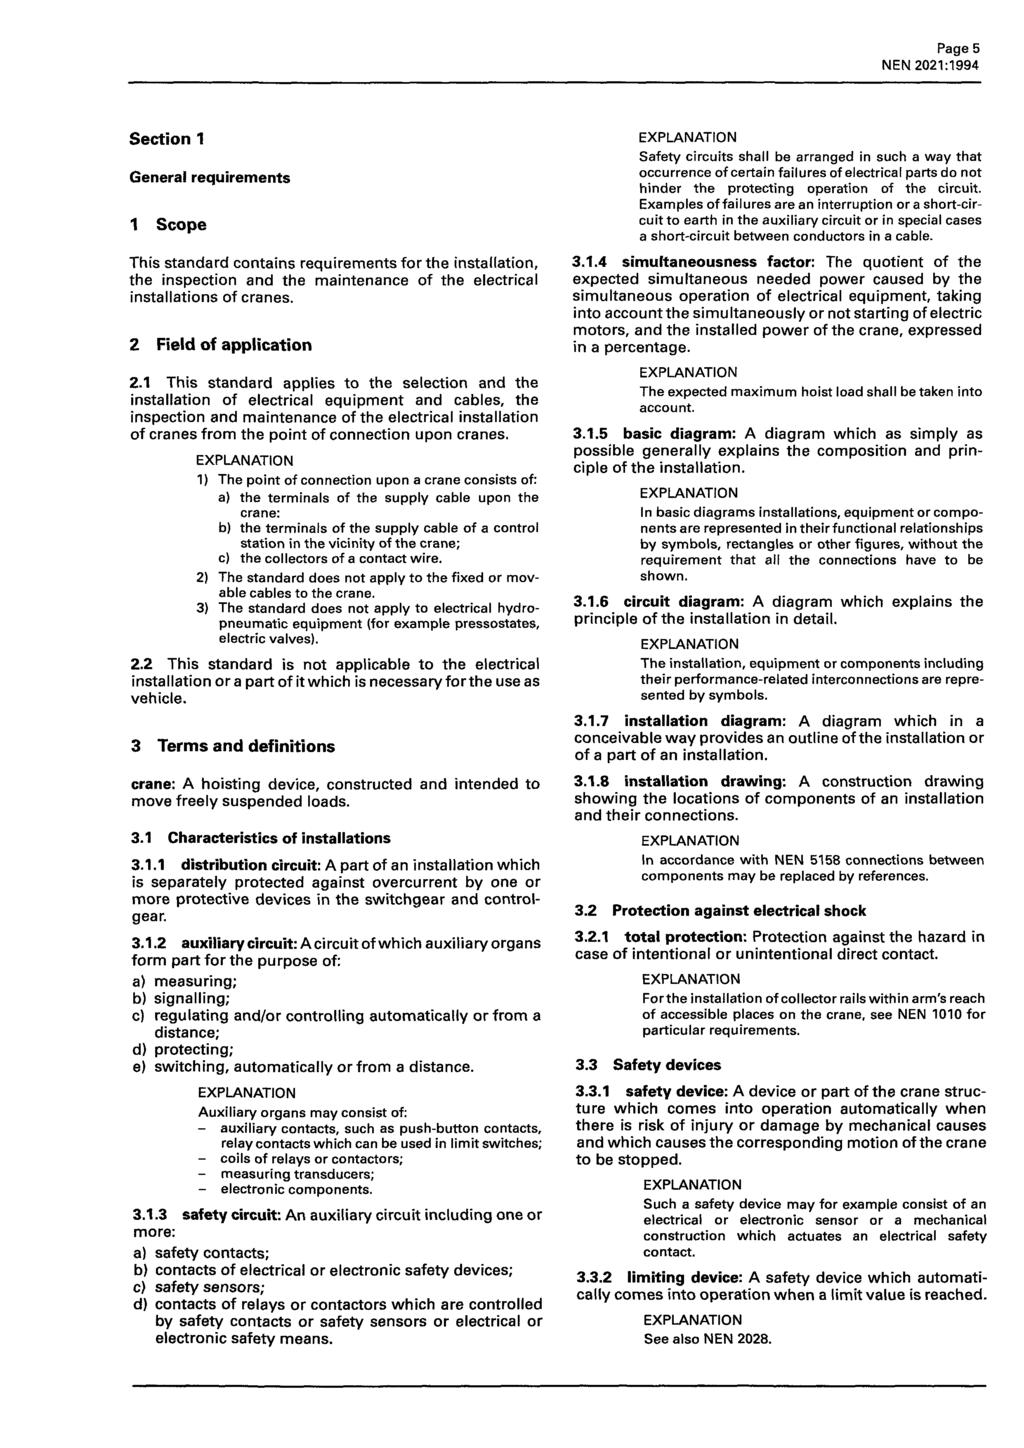 Page 5 Section 1 General requirements 1 Scope This standard contains requirements for the installation, the inspection and the maintenance of the electrical installations of cranes.